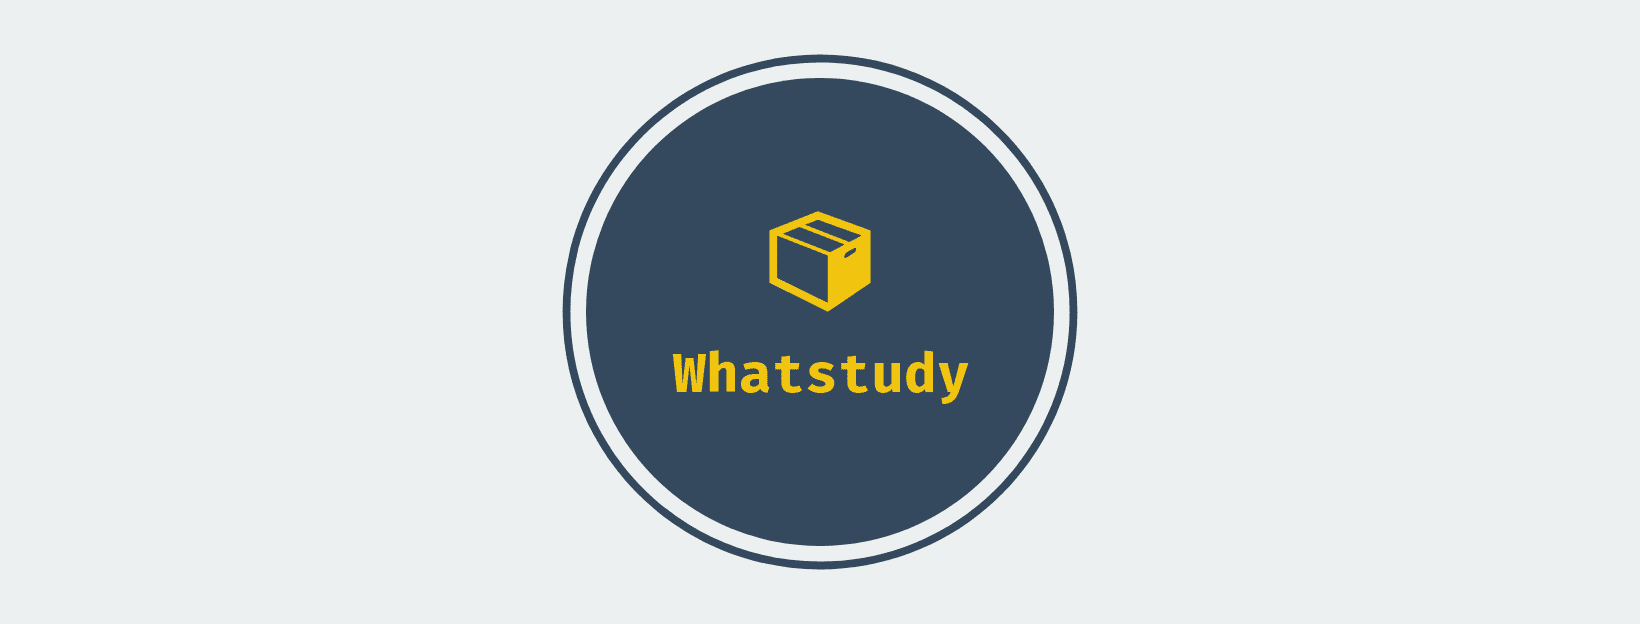 VXX Made Easy by Optionpit taking at Whatstudy.com